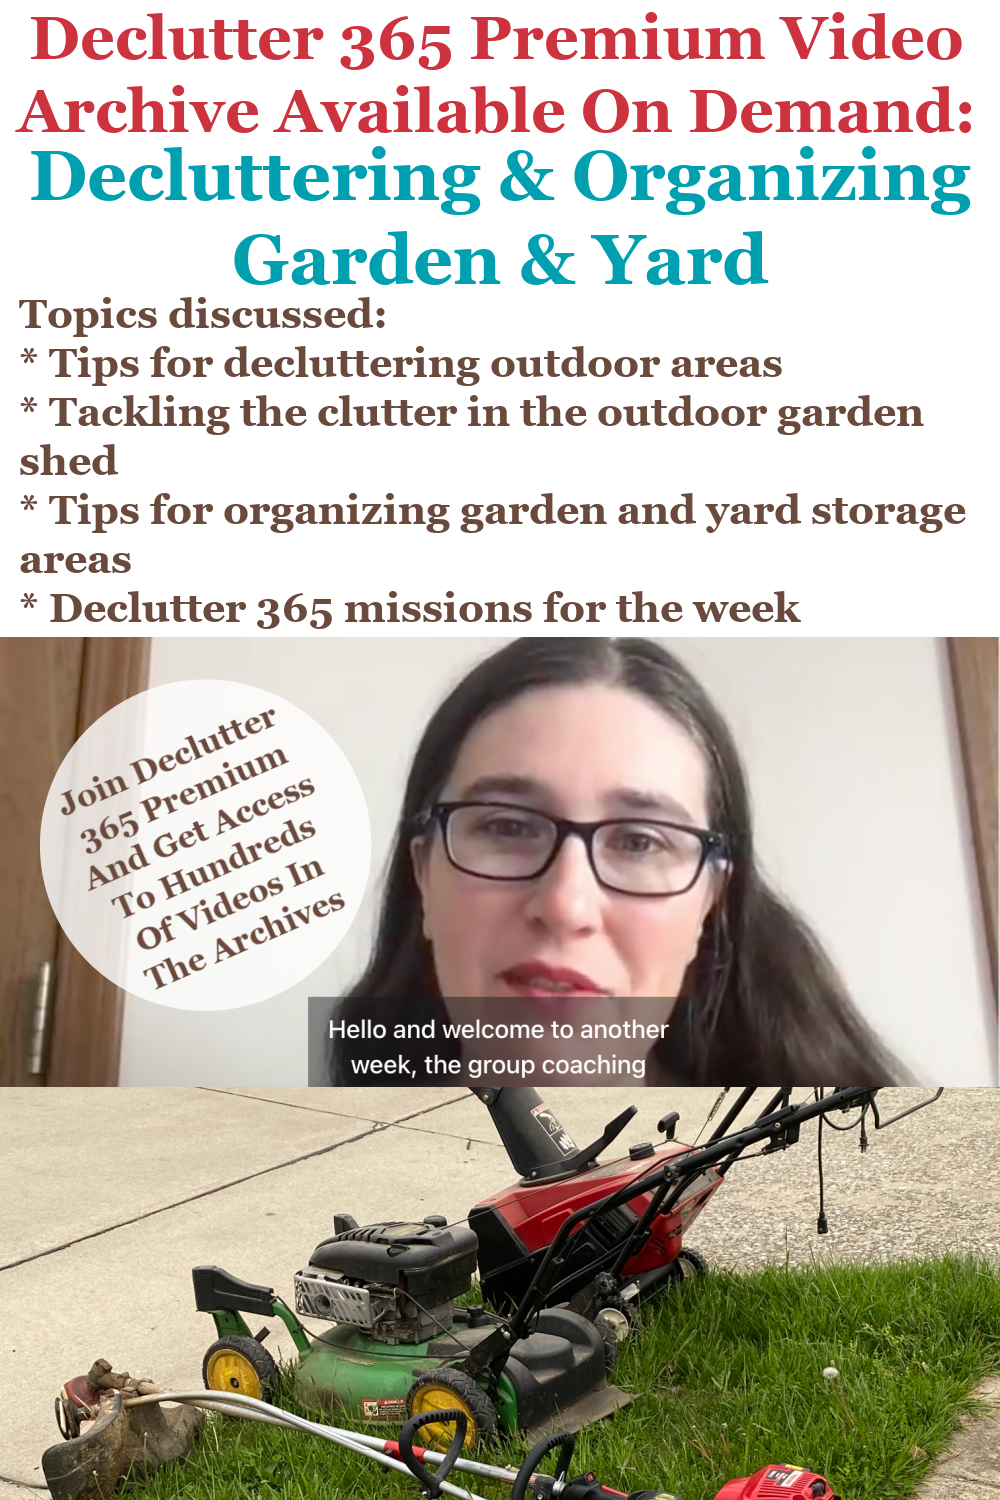 Declutter 365 Premium video archive available on demand all about decluttering and organizing garden and yard, on Home Storage Solutions 101